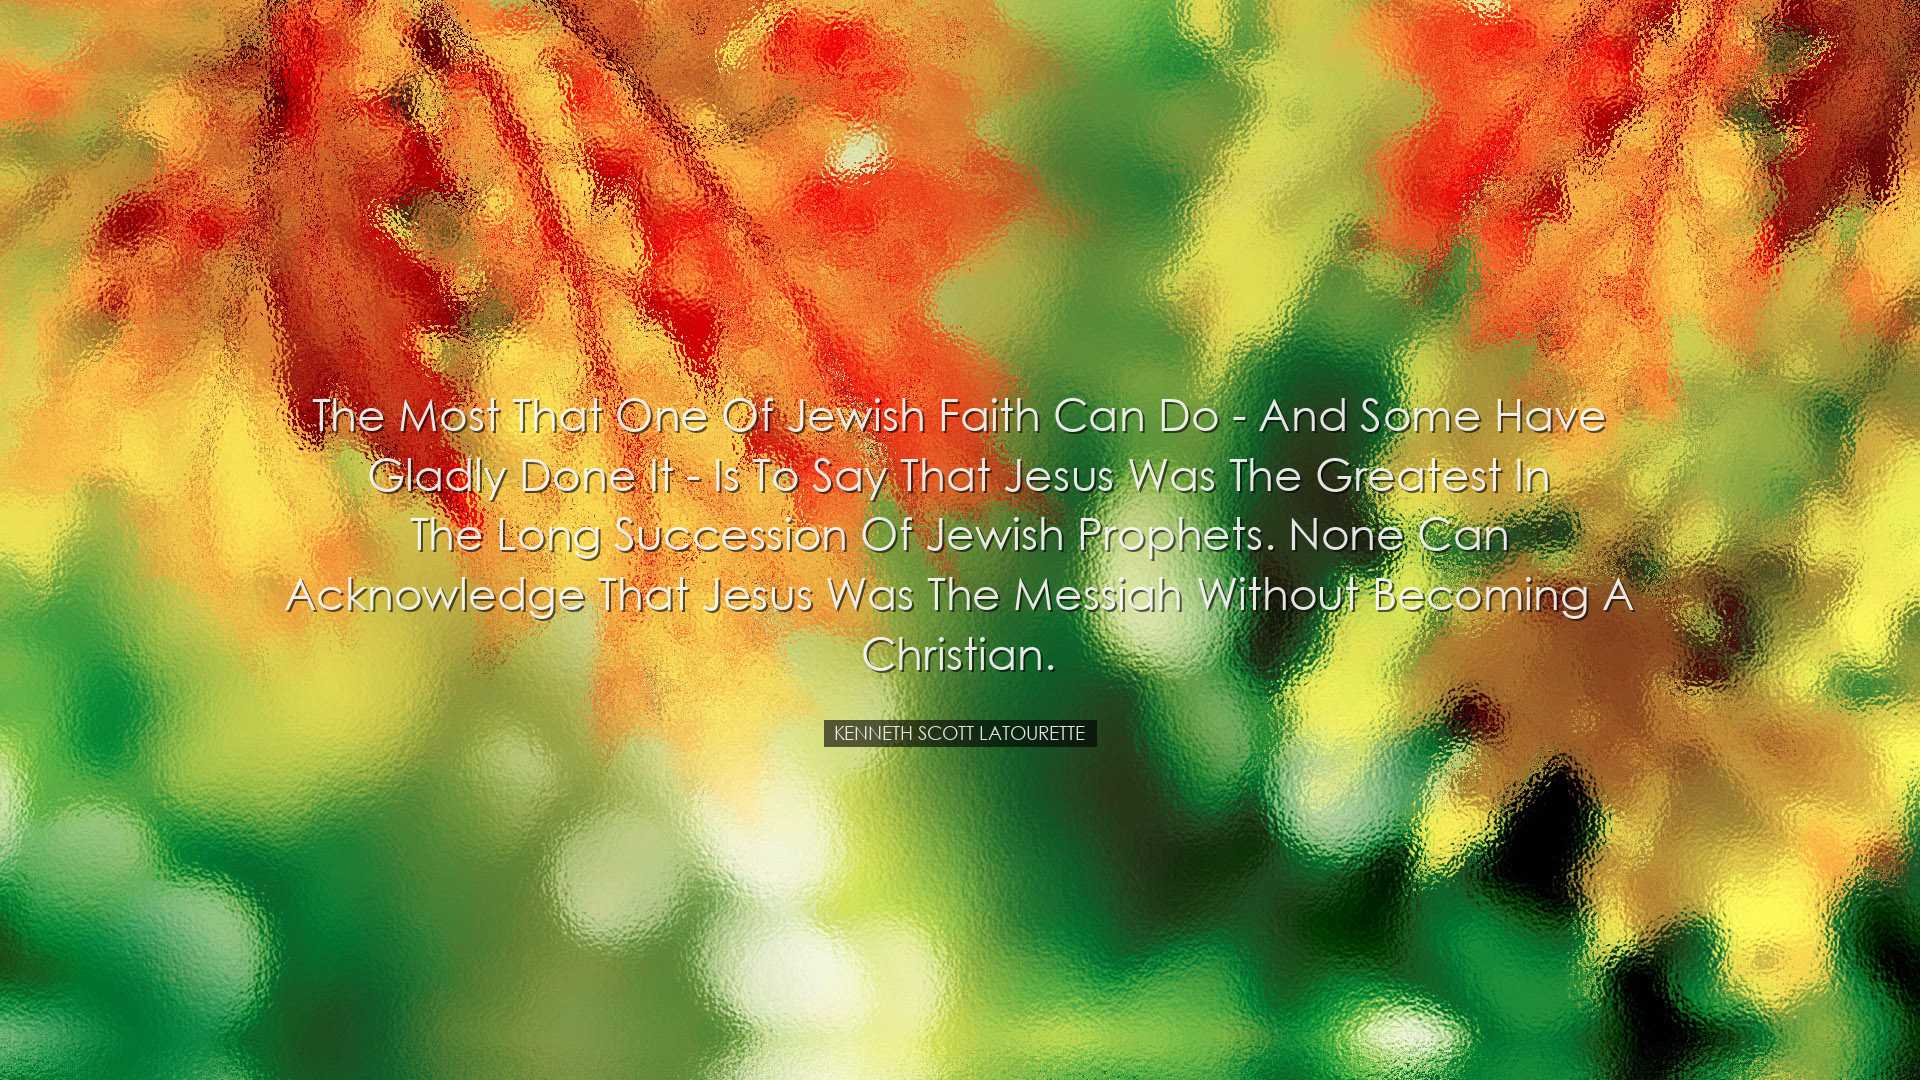 The most that one of Jewish faith can do - and some have gladly do